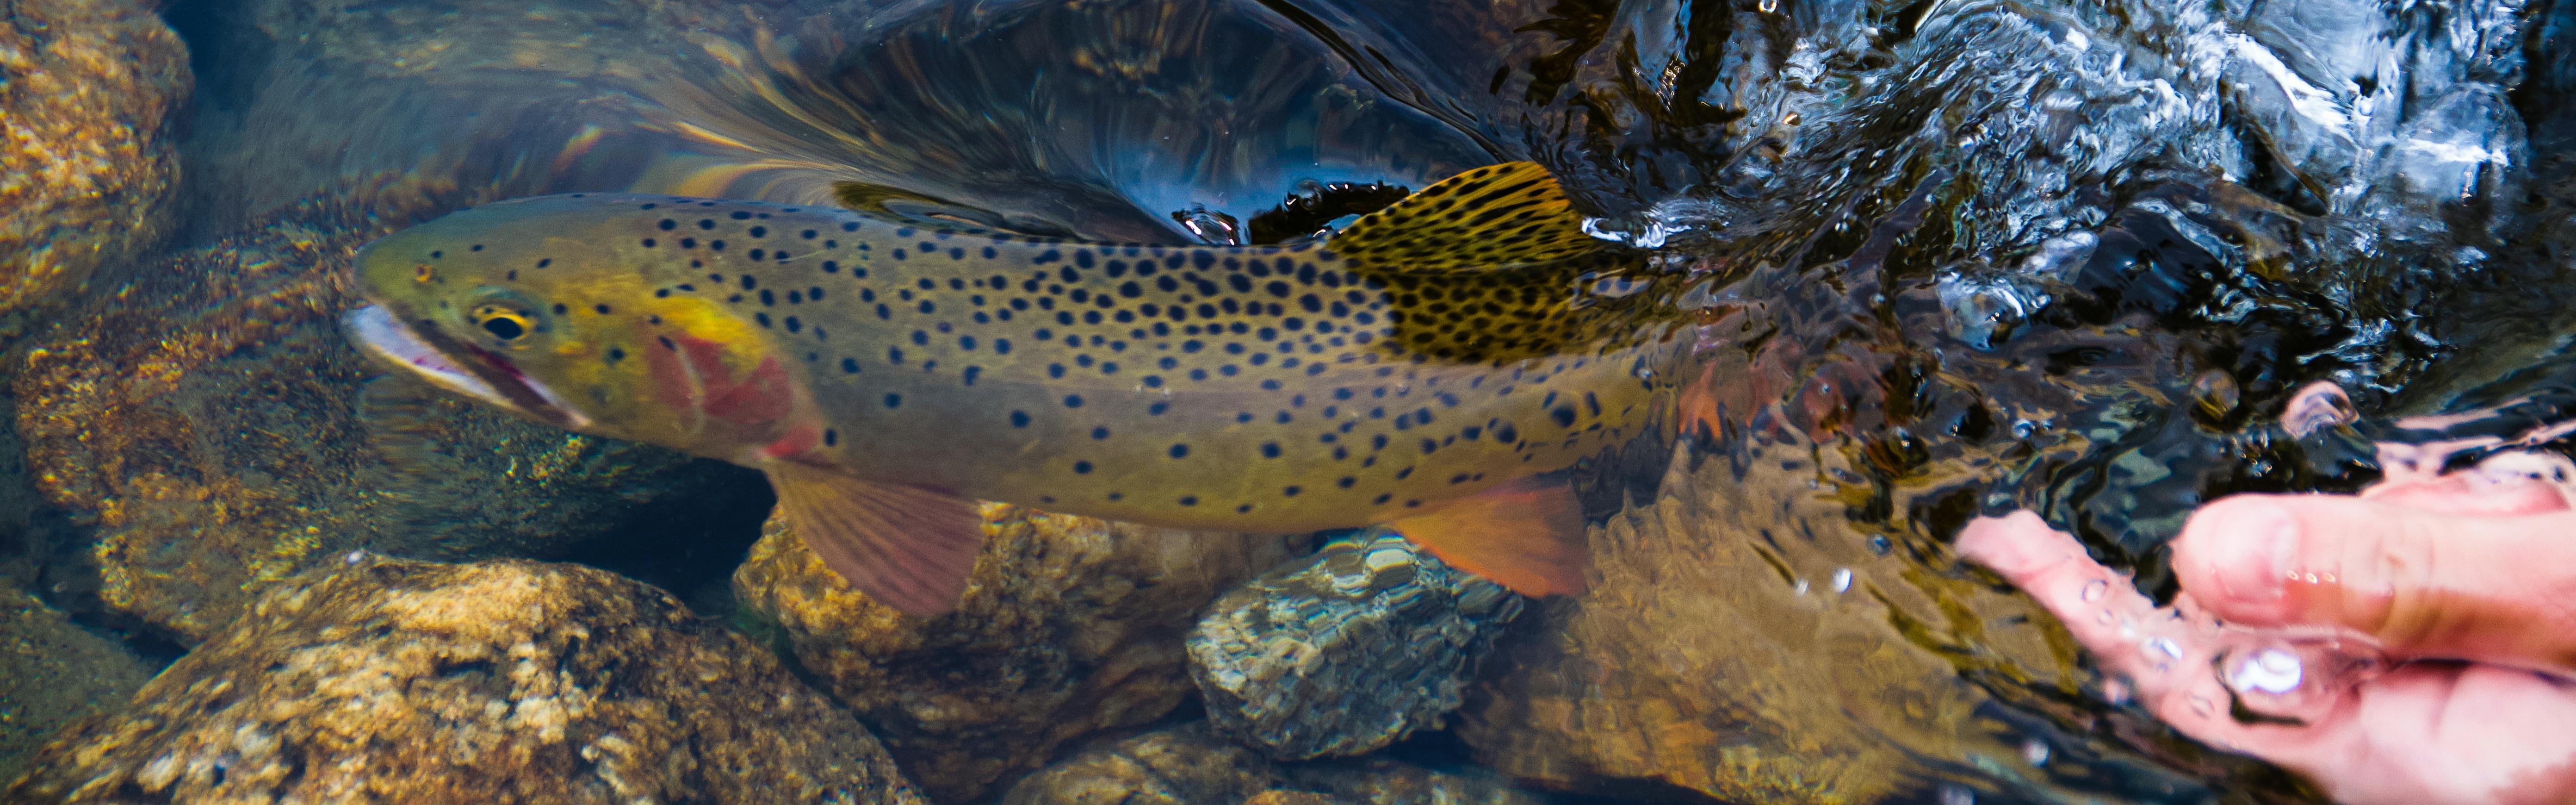 A trout being released into water.